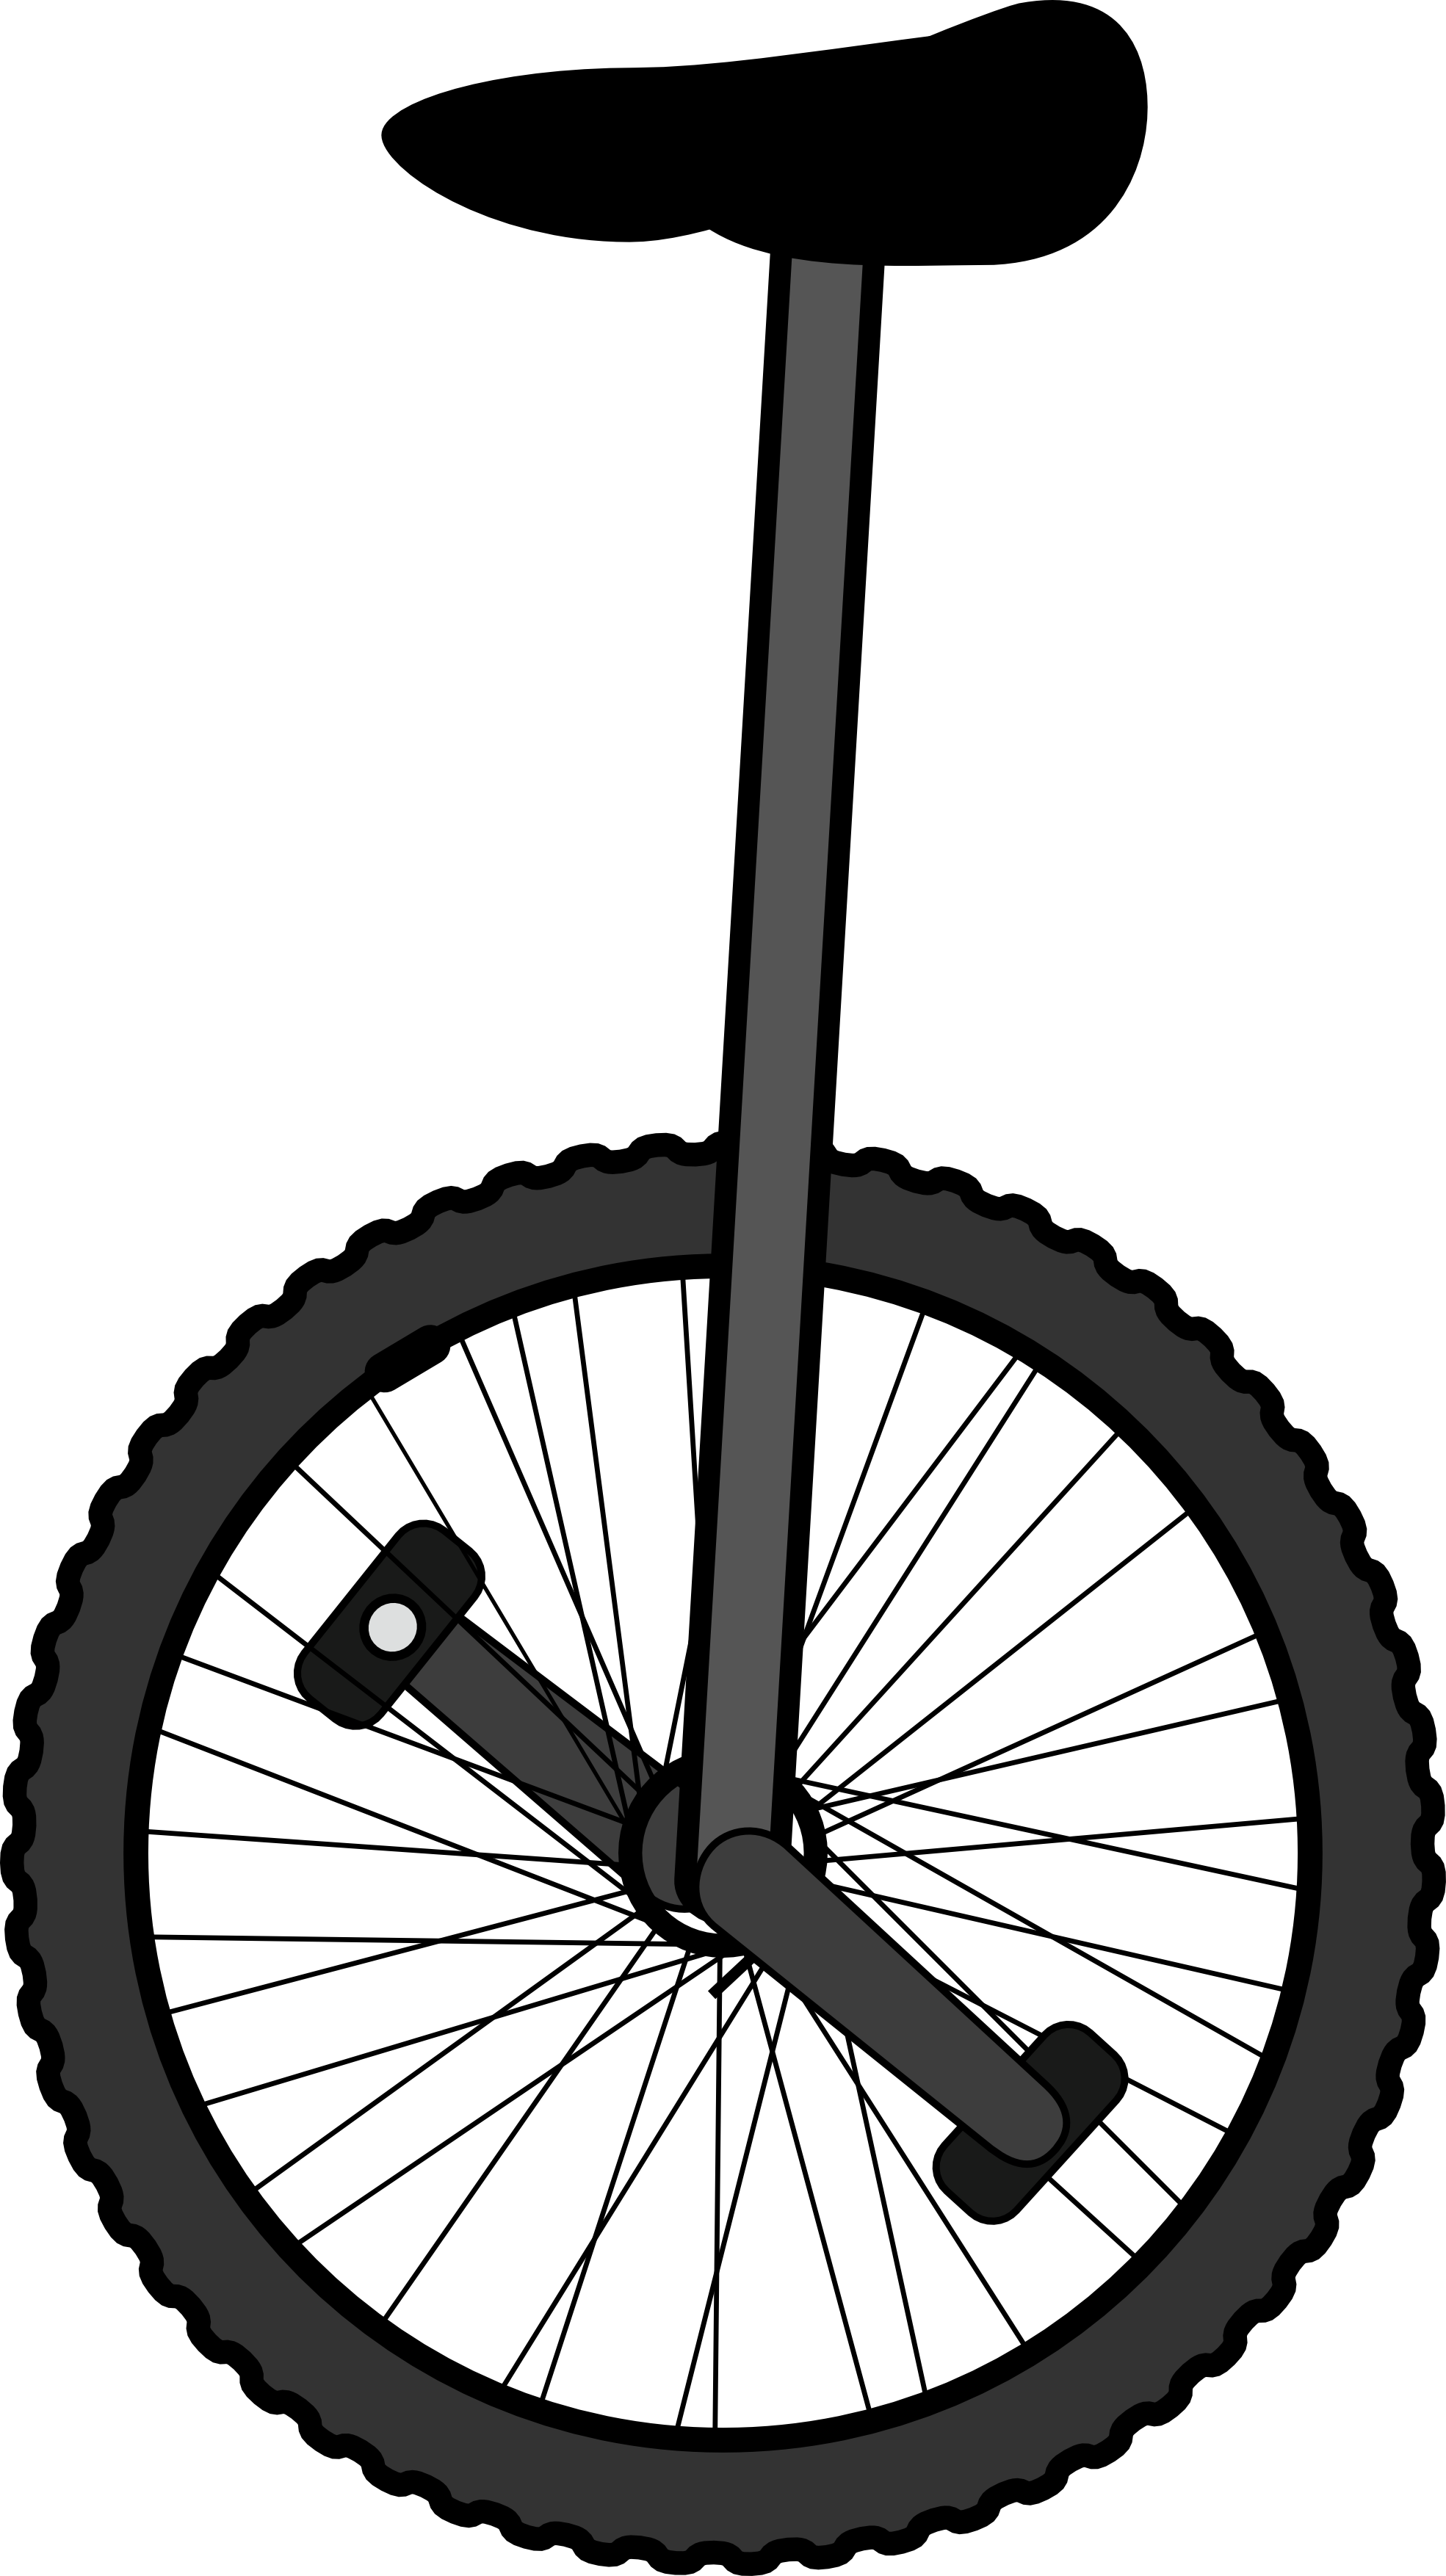 circus clipart bicycle